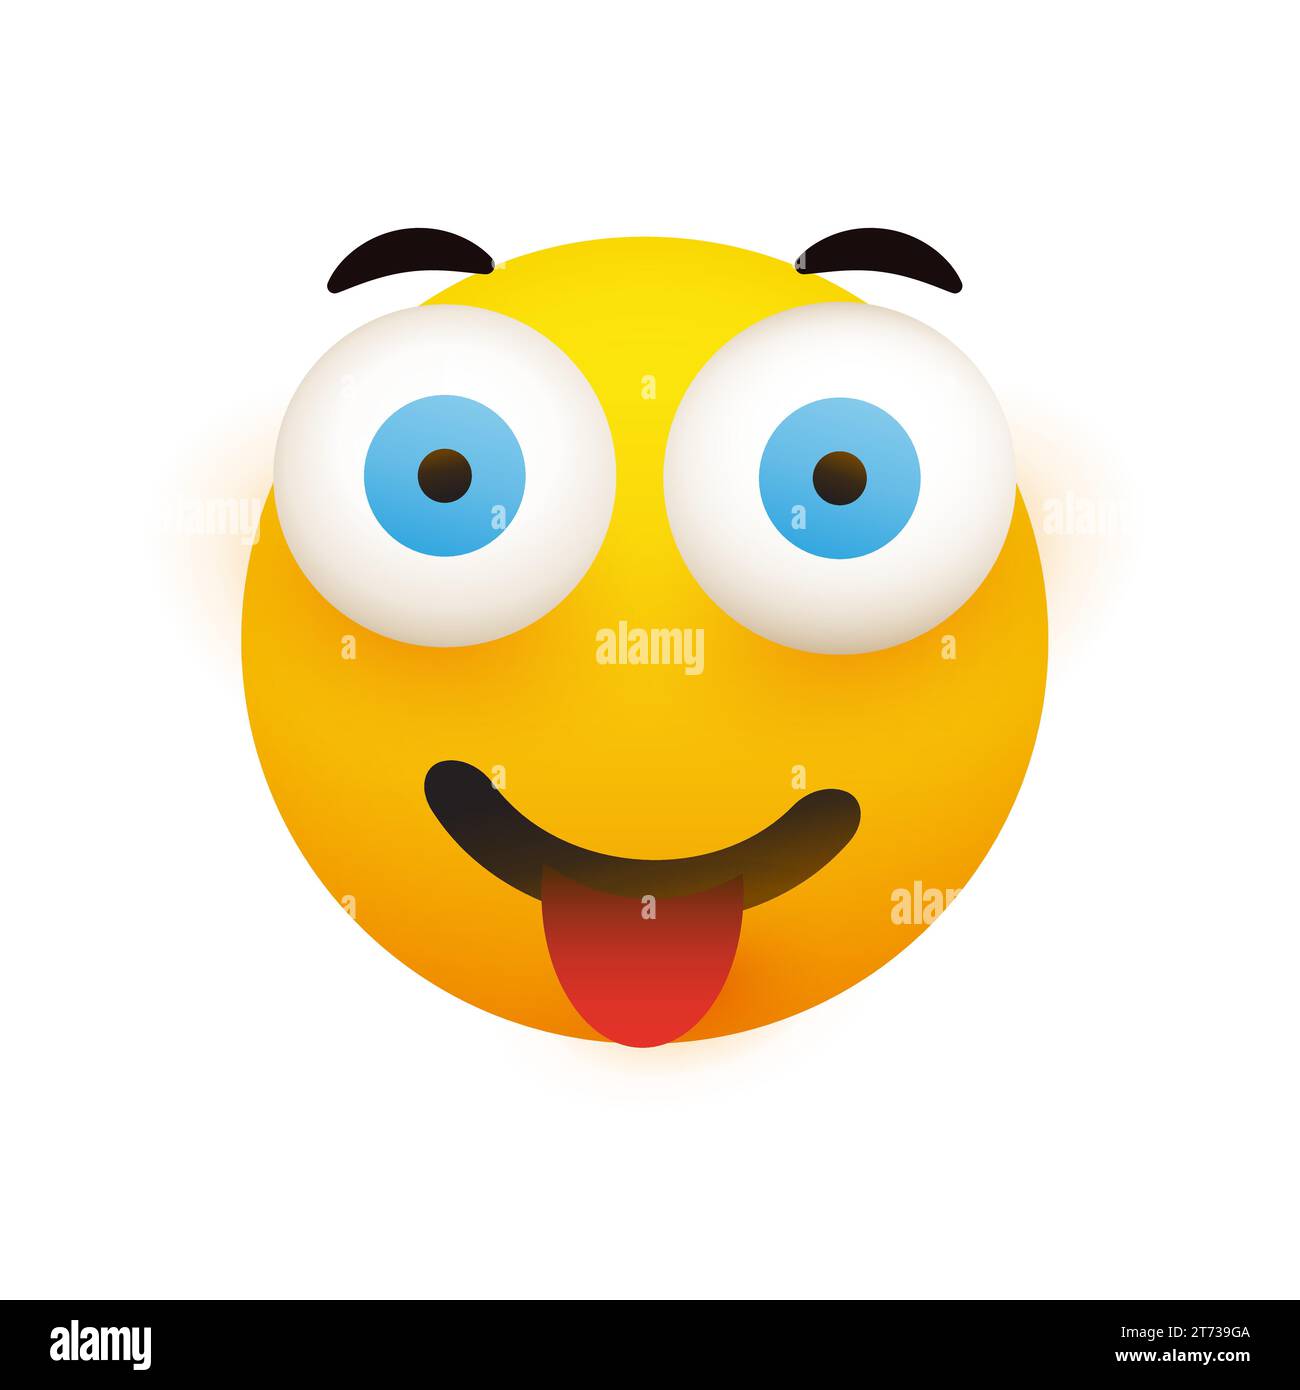 Smiling Emoji Face With Tongue Out - Simple Happy Emoticon Design on Transparent Background Stock Vector